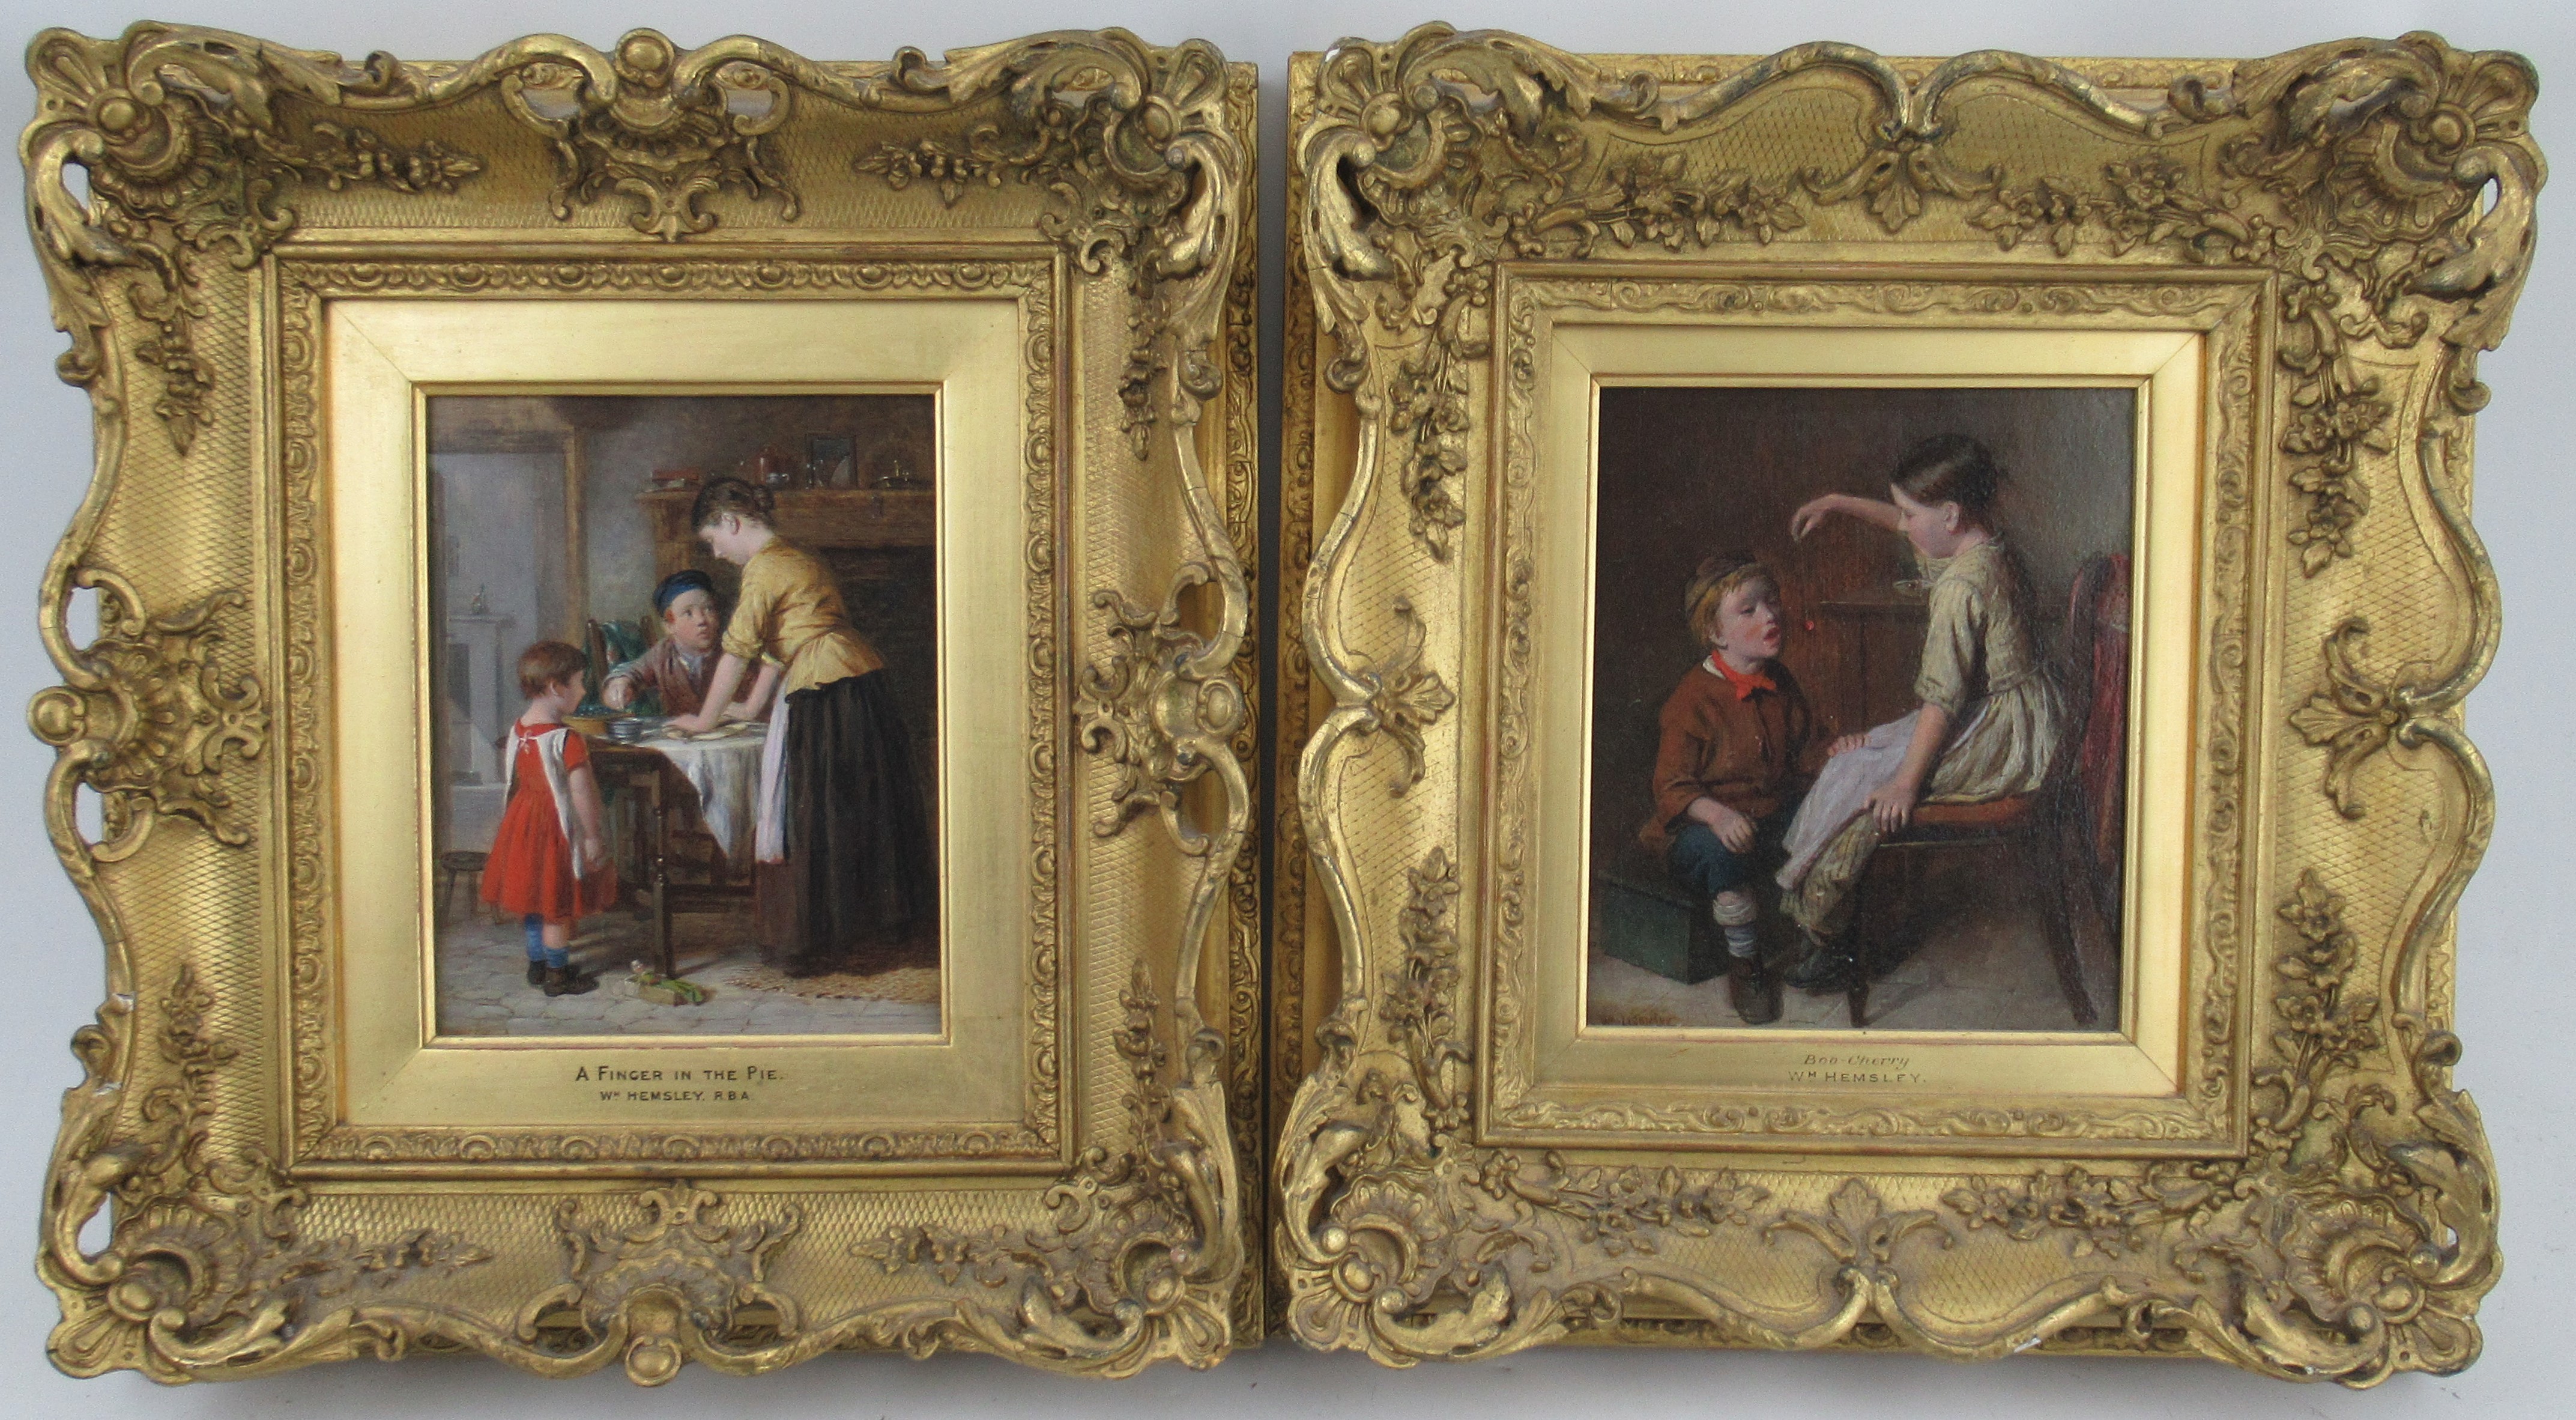 William Hemsley, two oil on boards, Bob Cherry and Finger in the Pie, interior scenes with children, - Image 8 of 14